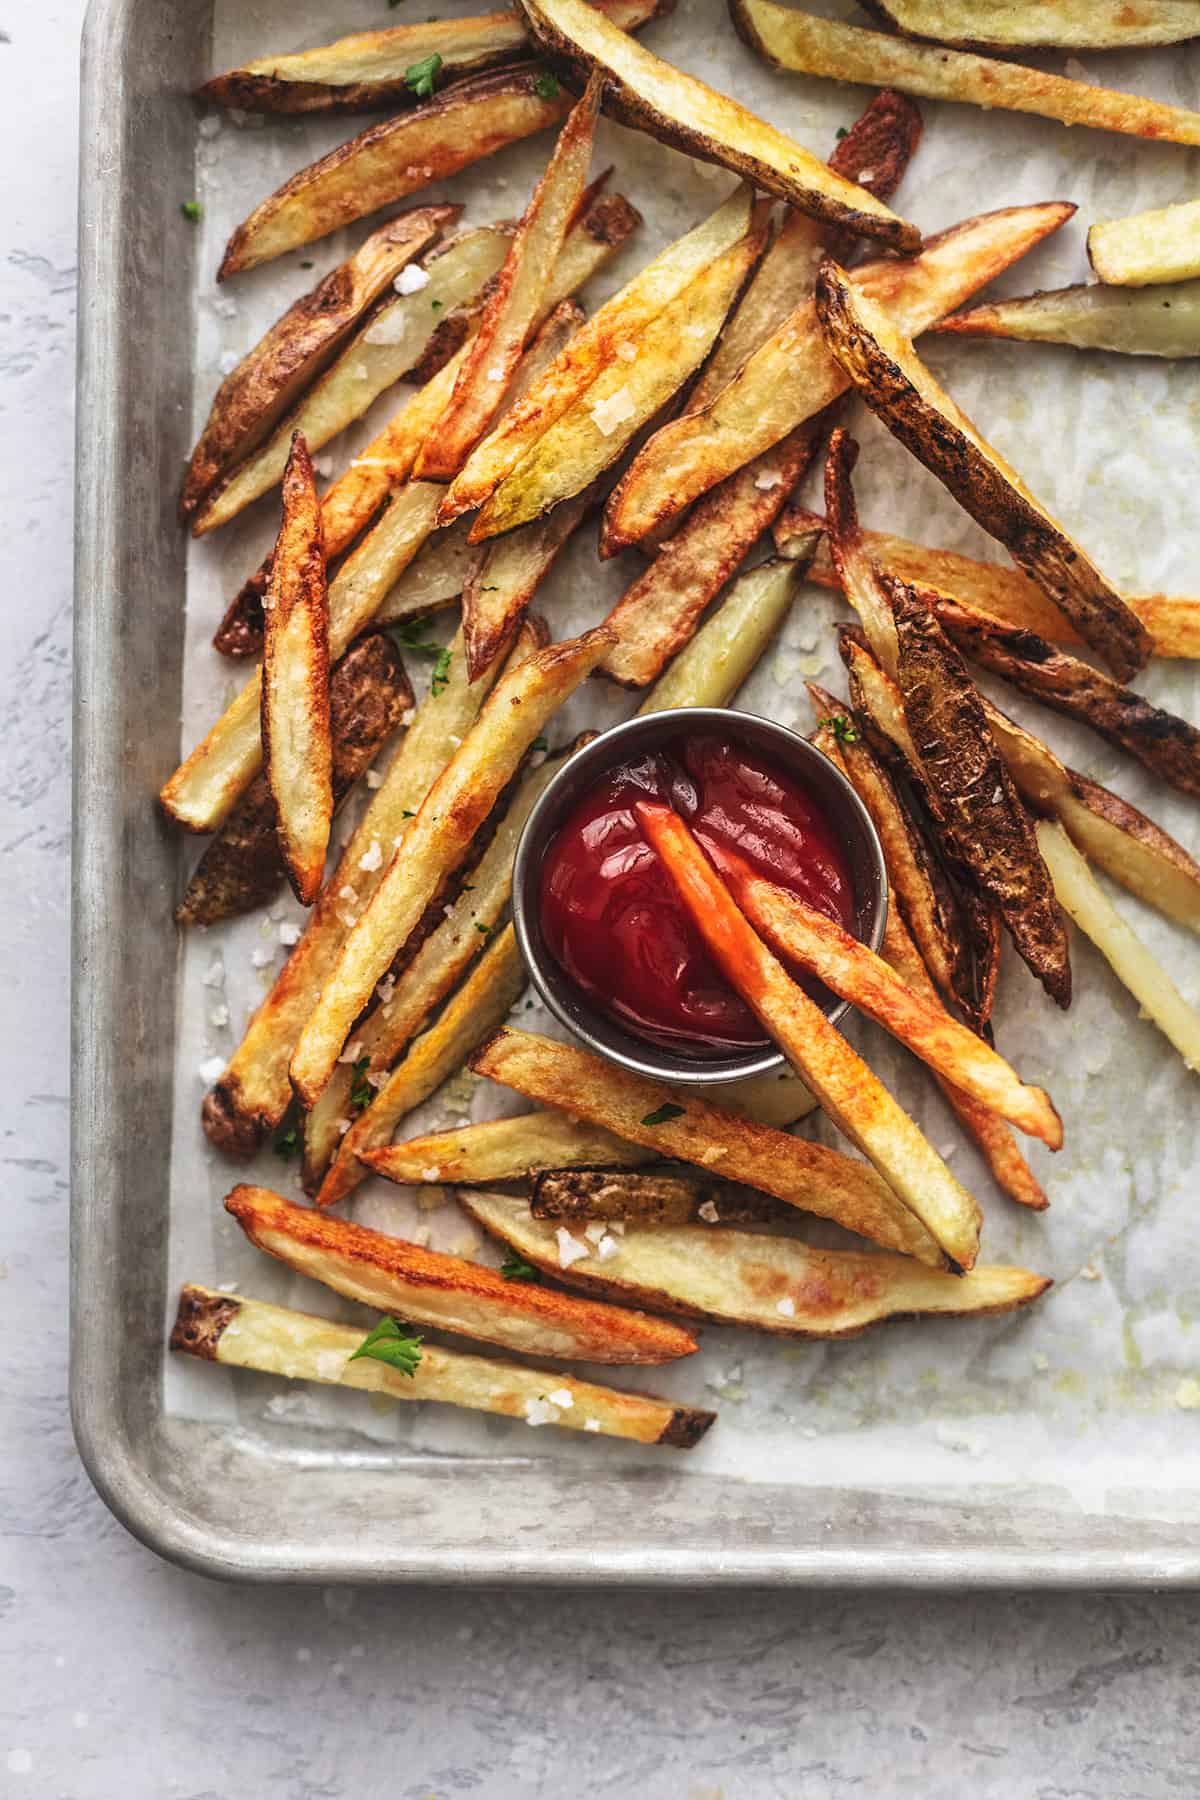 top view of baked french fries on a baking sheet with ketchup in a cup.